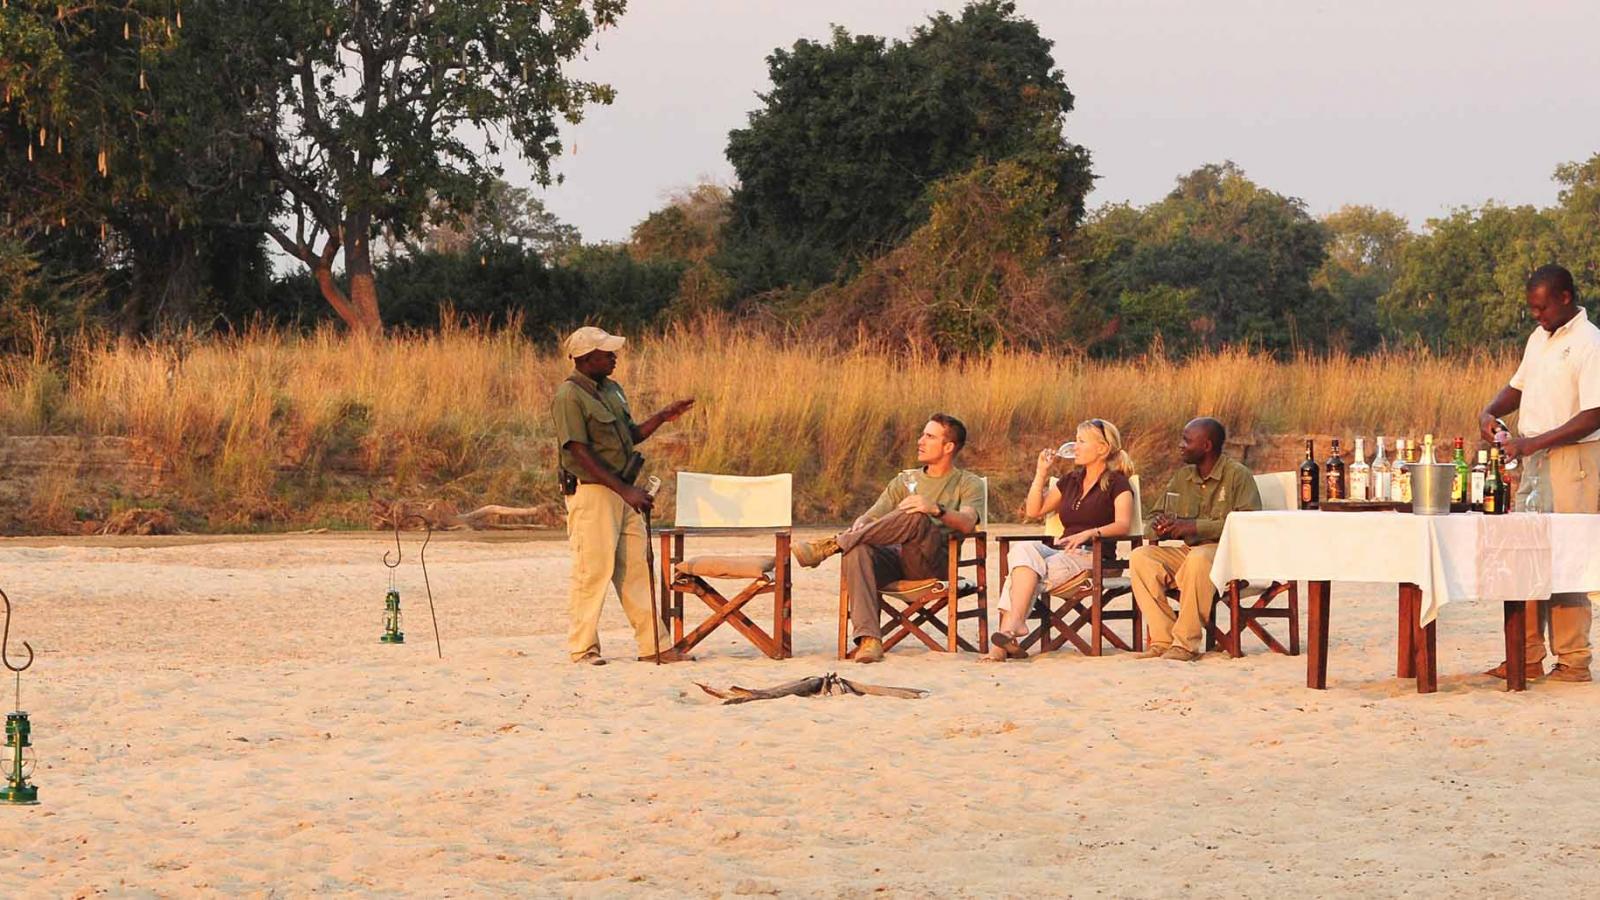 Exhilarating experiences in Zambia